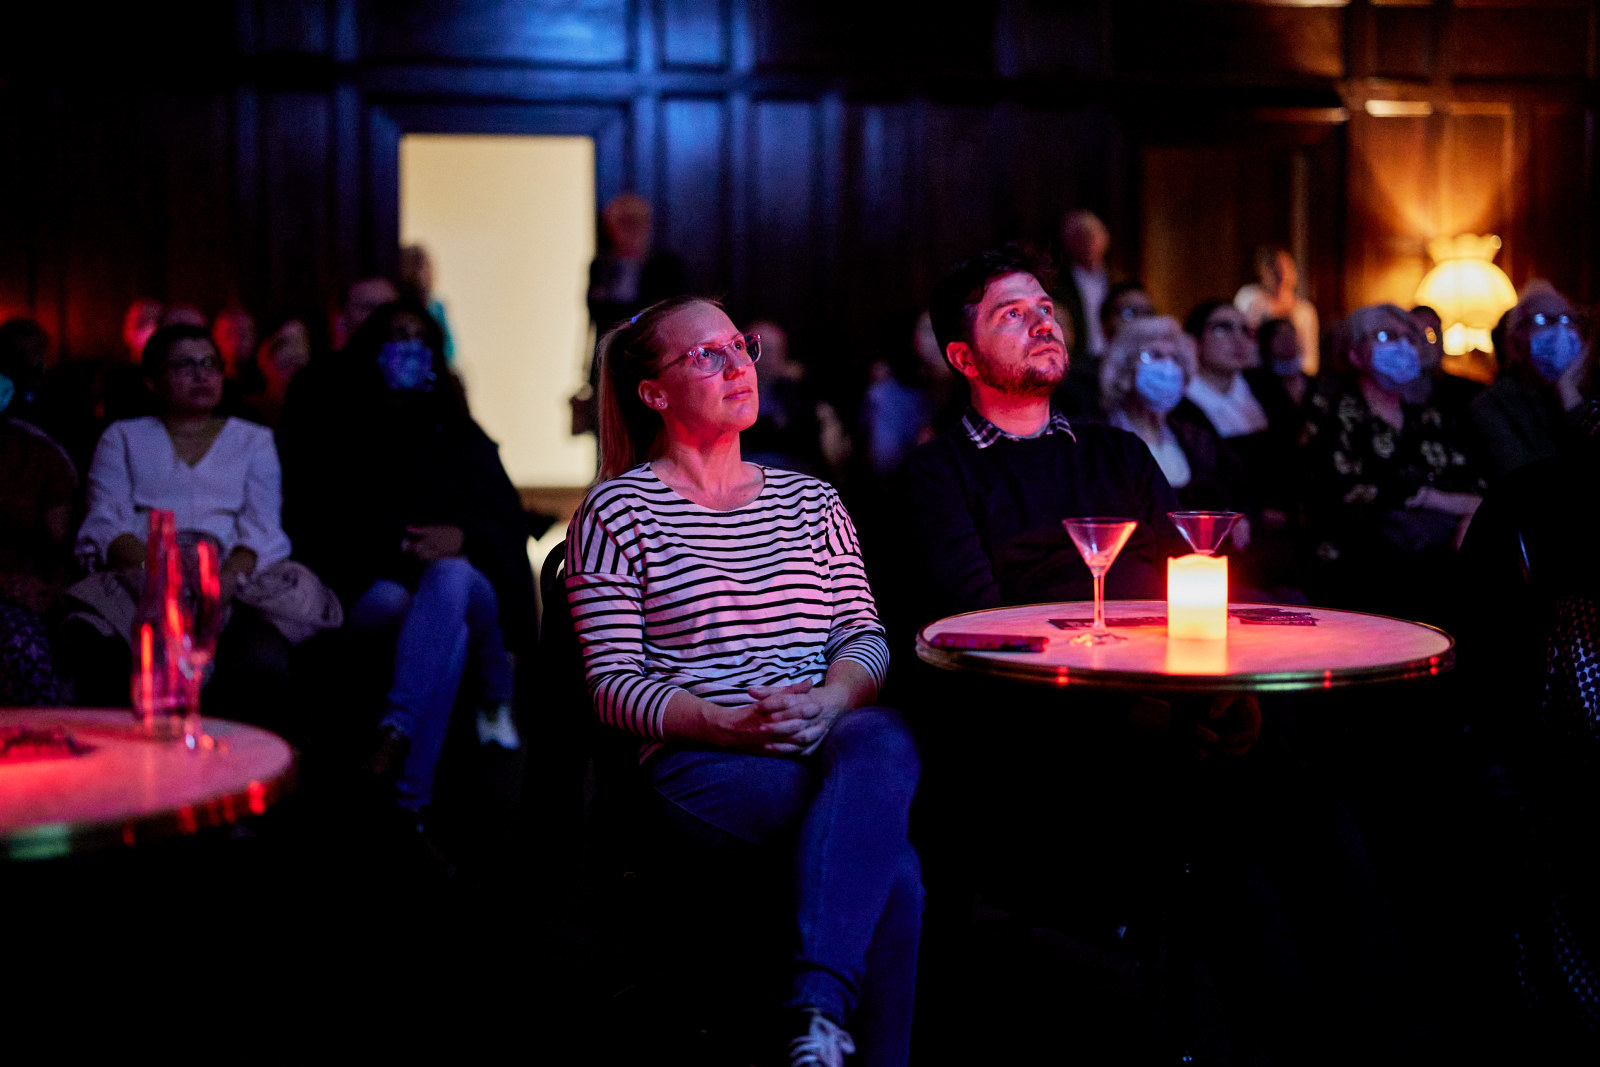 Visitors look up, their faces illuminated by the light of the projected film. They are seated at round tables with candles and cocktails.